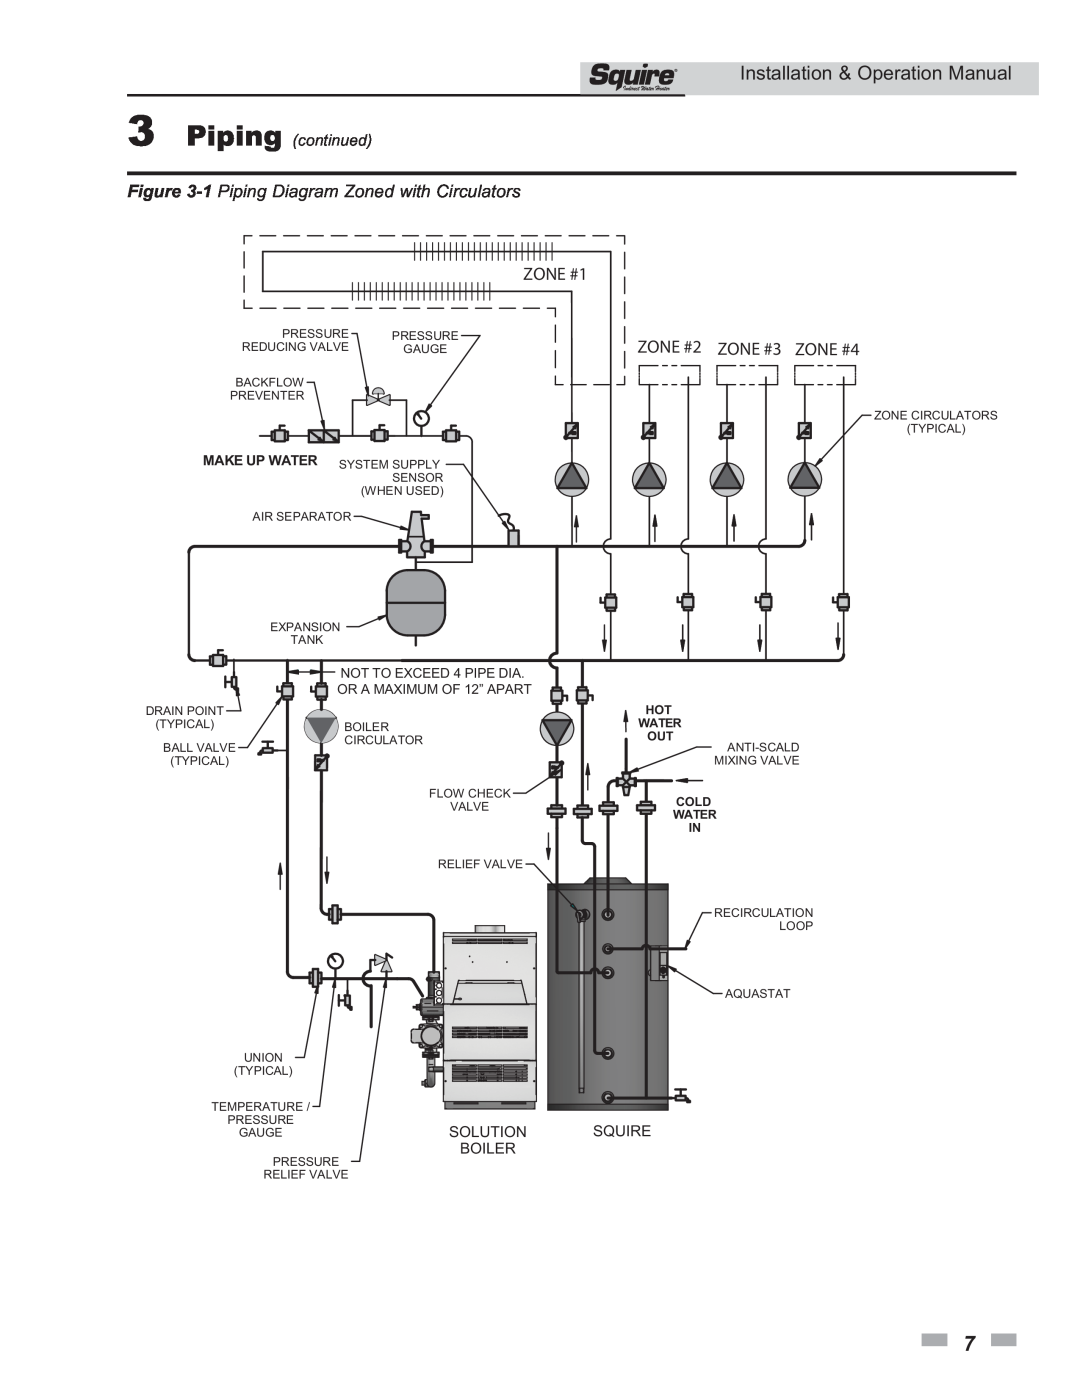 Lochinvar SSS03 1 Piping Diagram Zoned with Circulators, 3Piping continued, Solution, Boiler, Squire, Make Up Water 